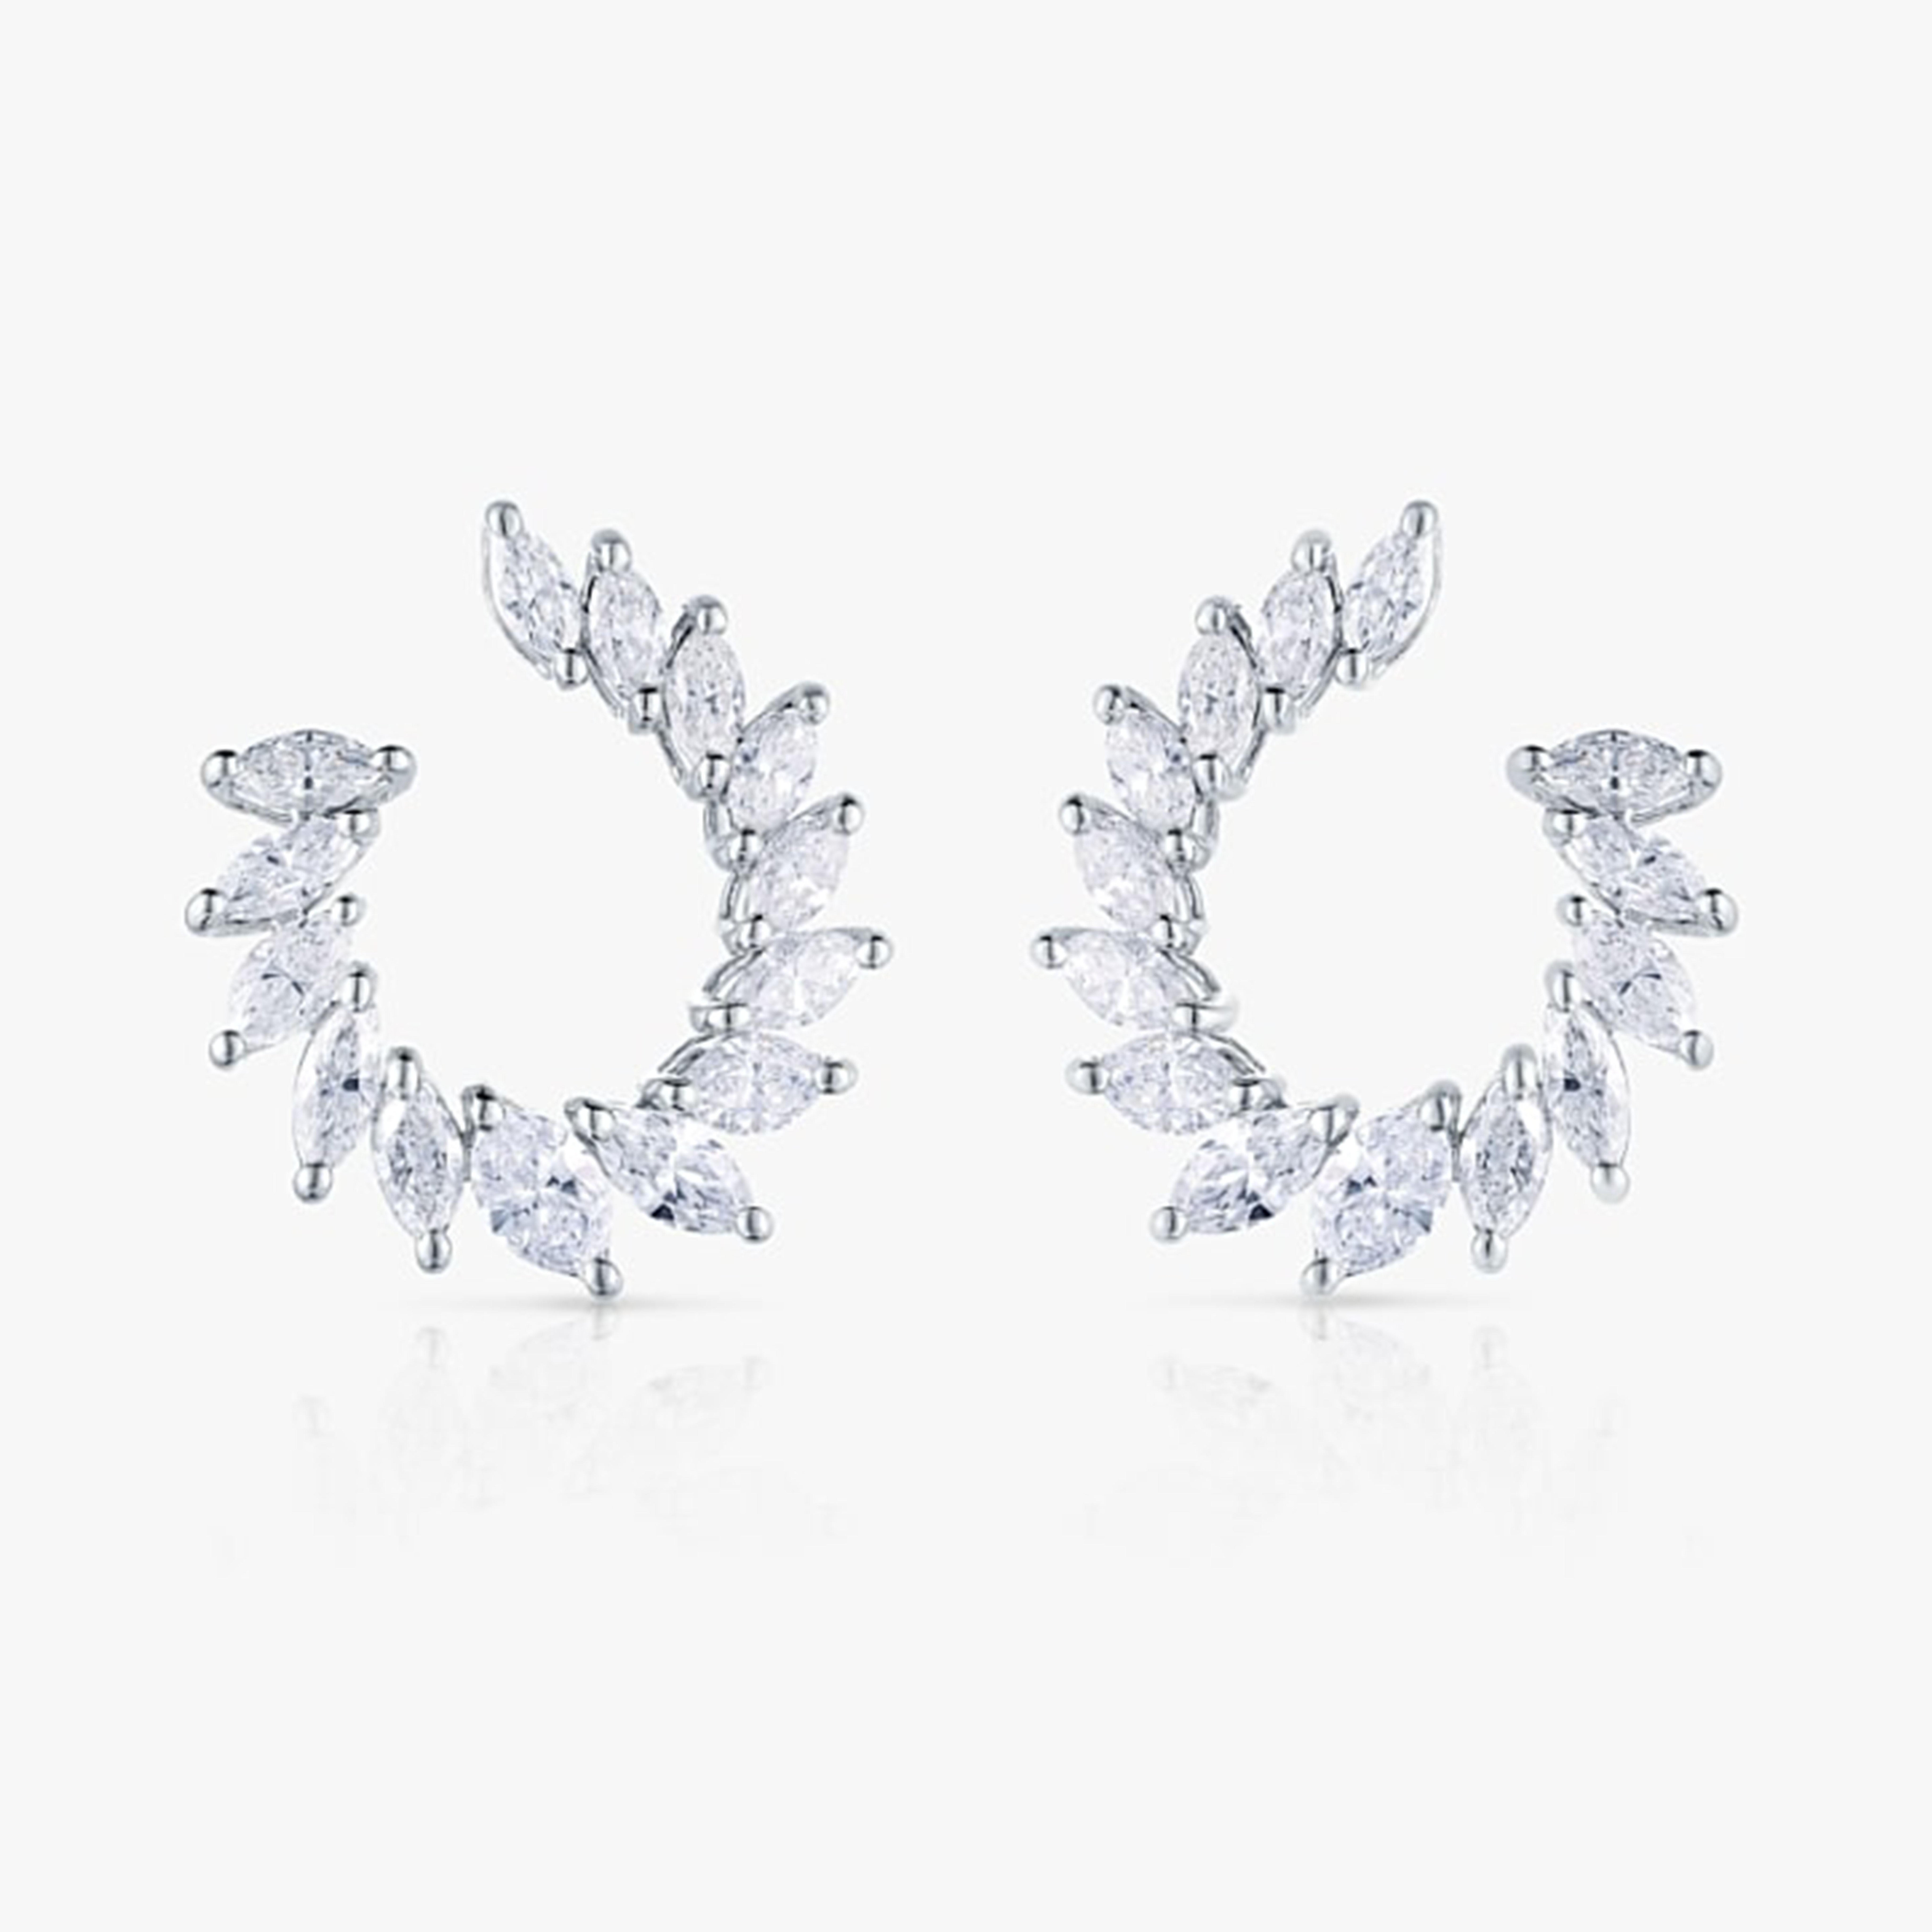 Perfect for adding a touch of elegance to any look, these earrings are sure to make an impression.

Earring Information 
Natural Diamond
Metal Purity : 18K
Width : 17.2mm
Height : 20mm
Gold Weight : 2.5g
Diamond count : 28PCS
Carat Weight : 2.5g